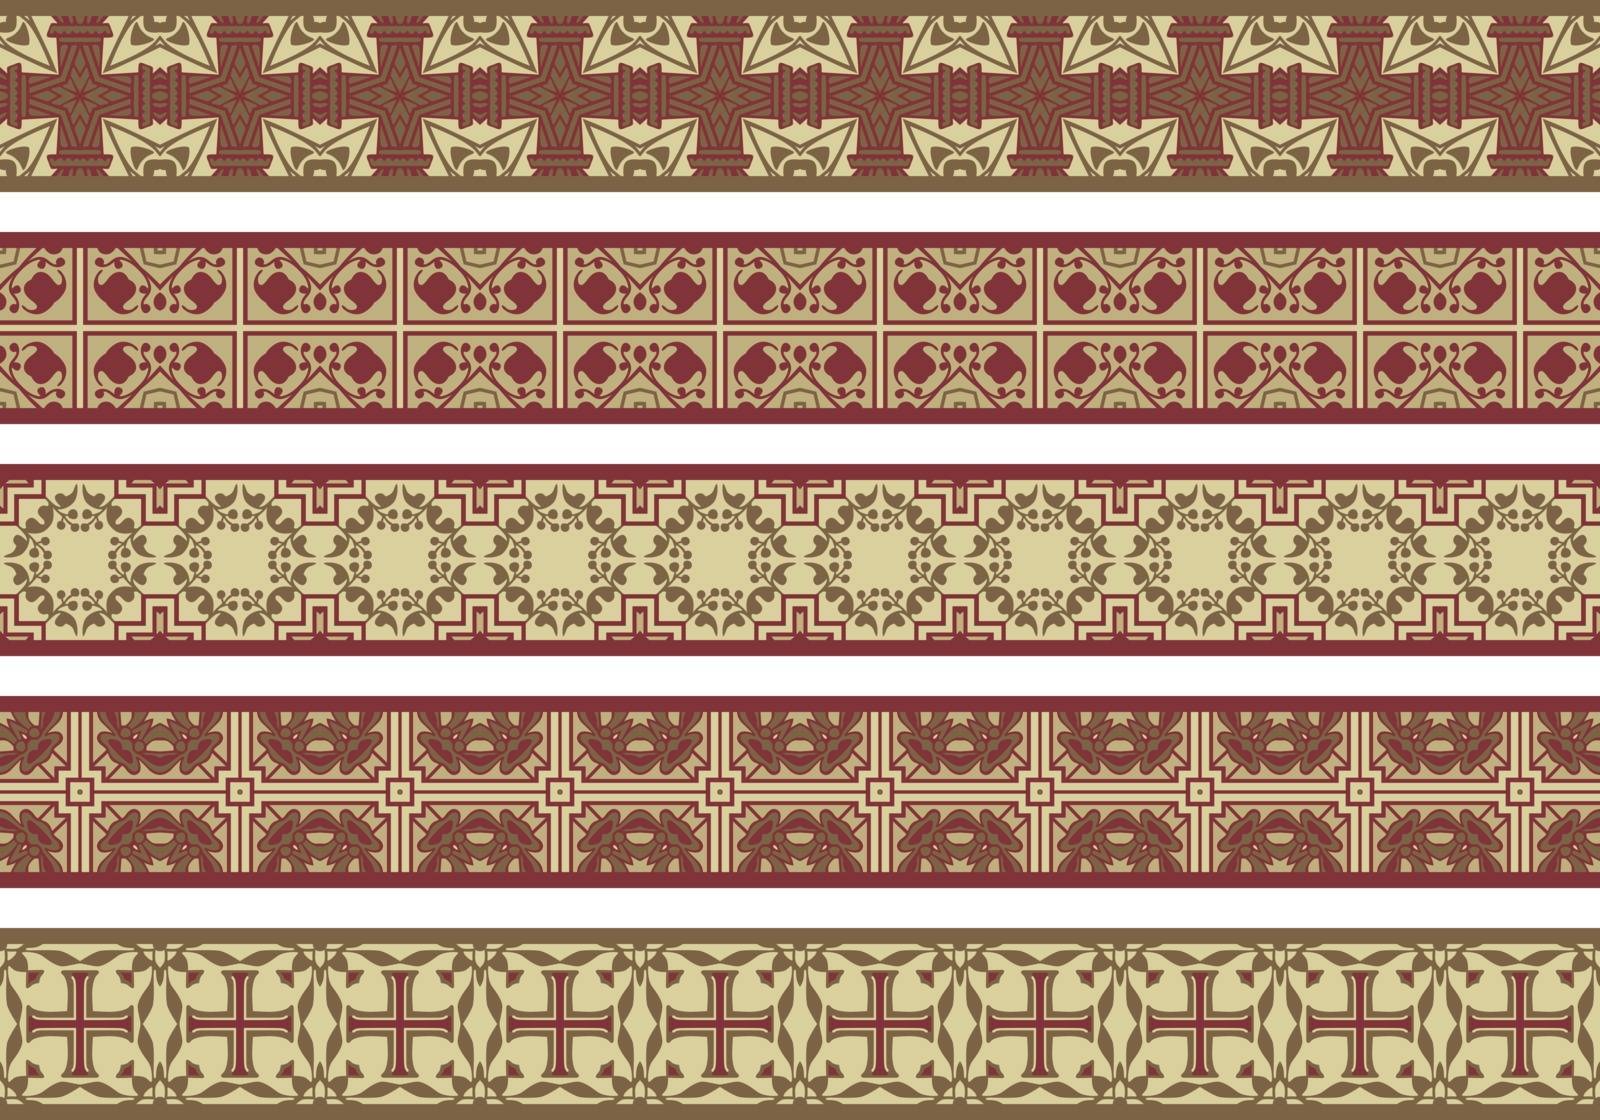 Seamless decorative borders by nahhan